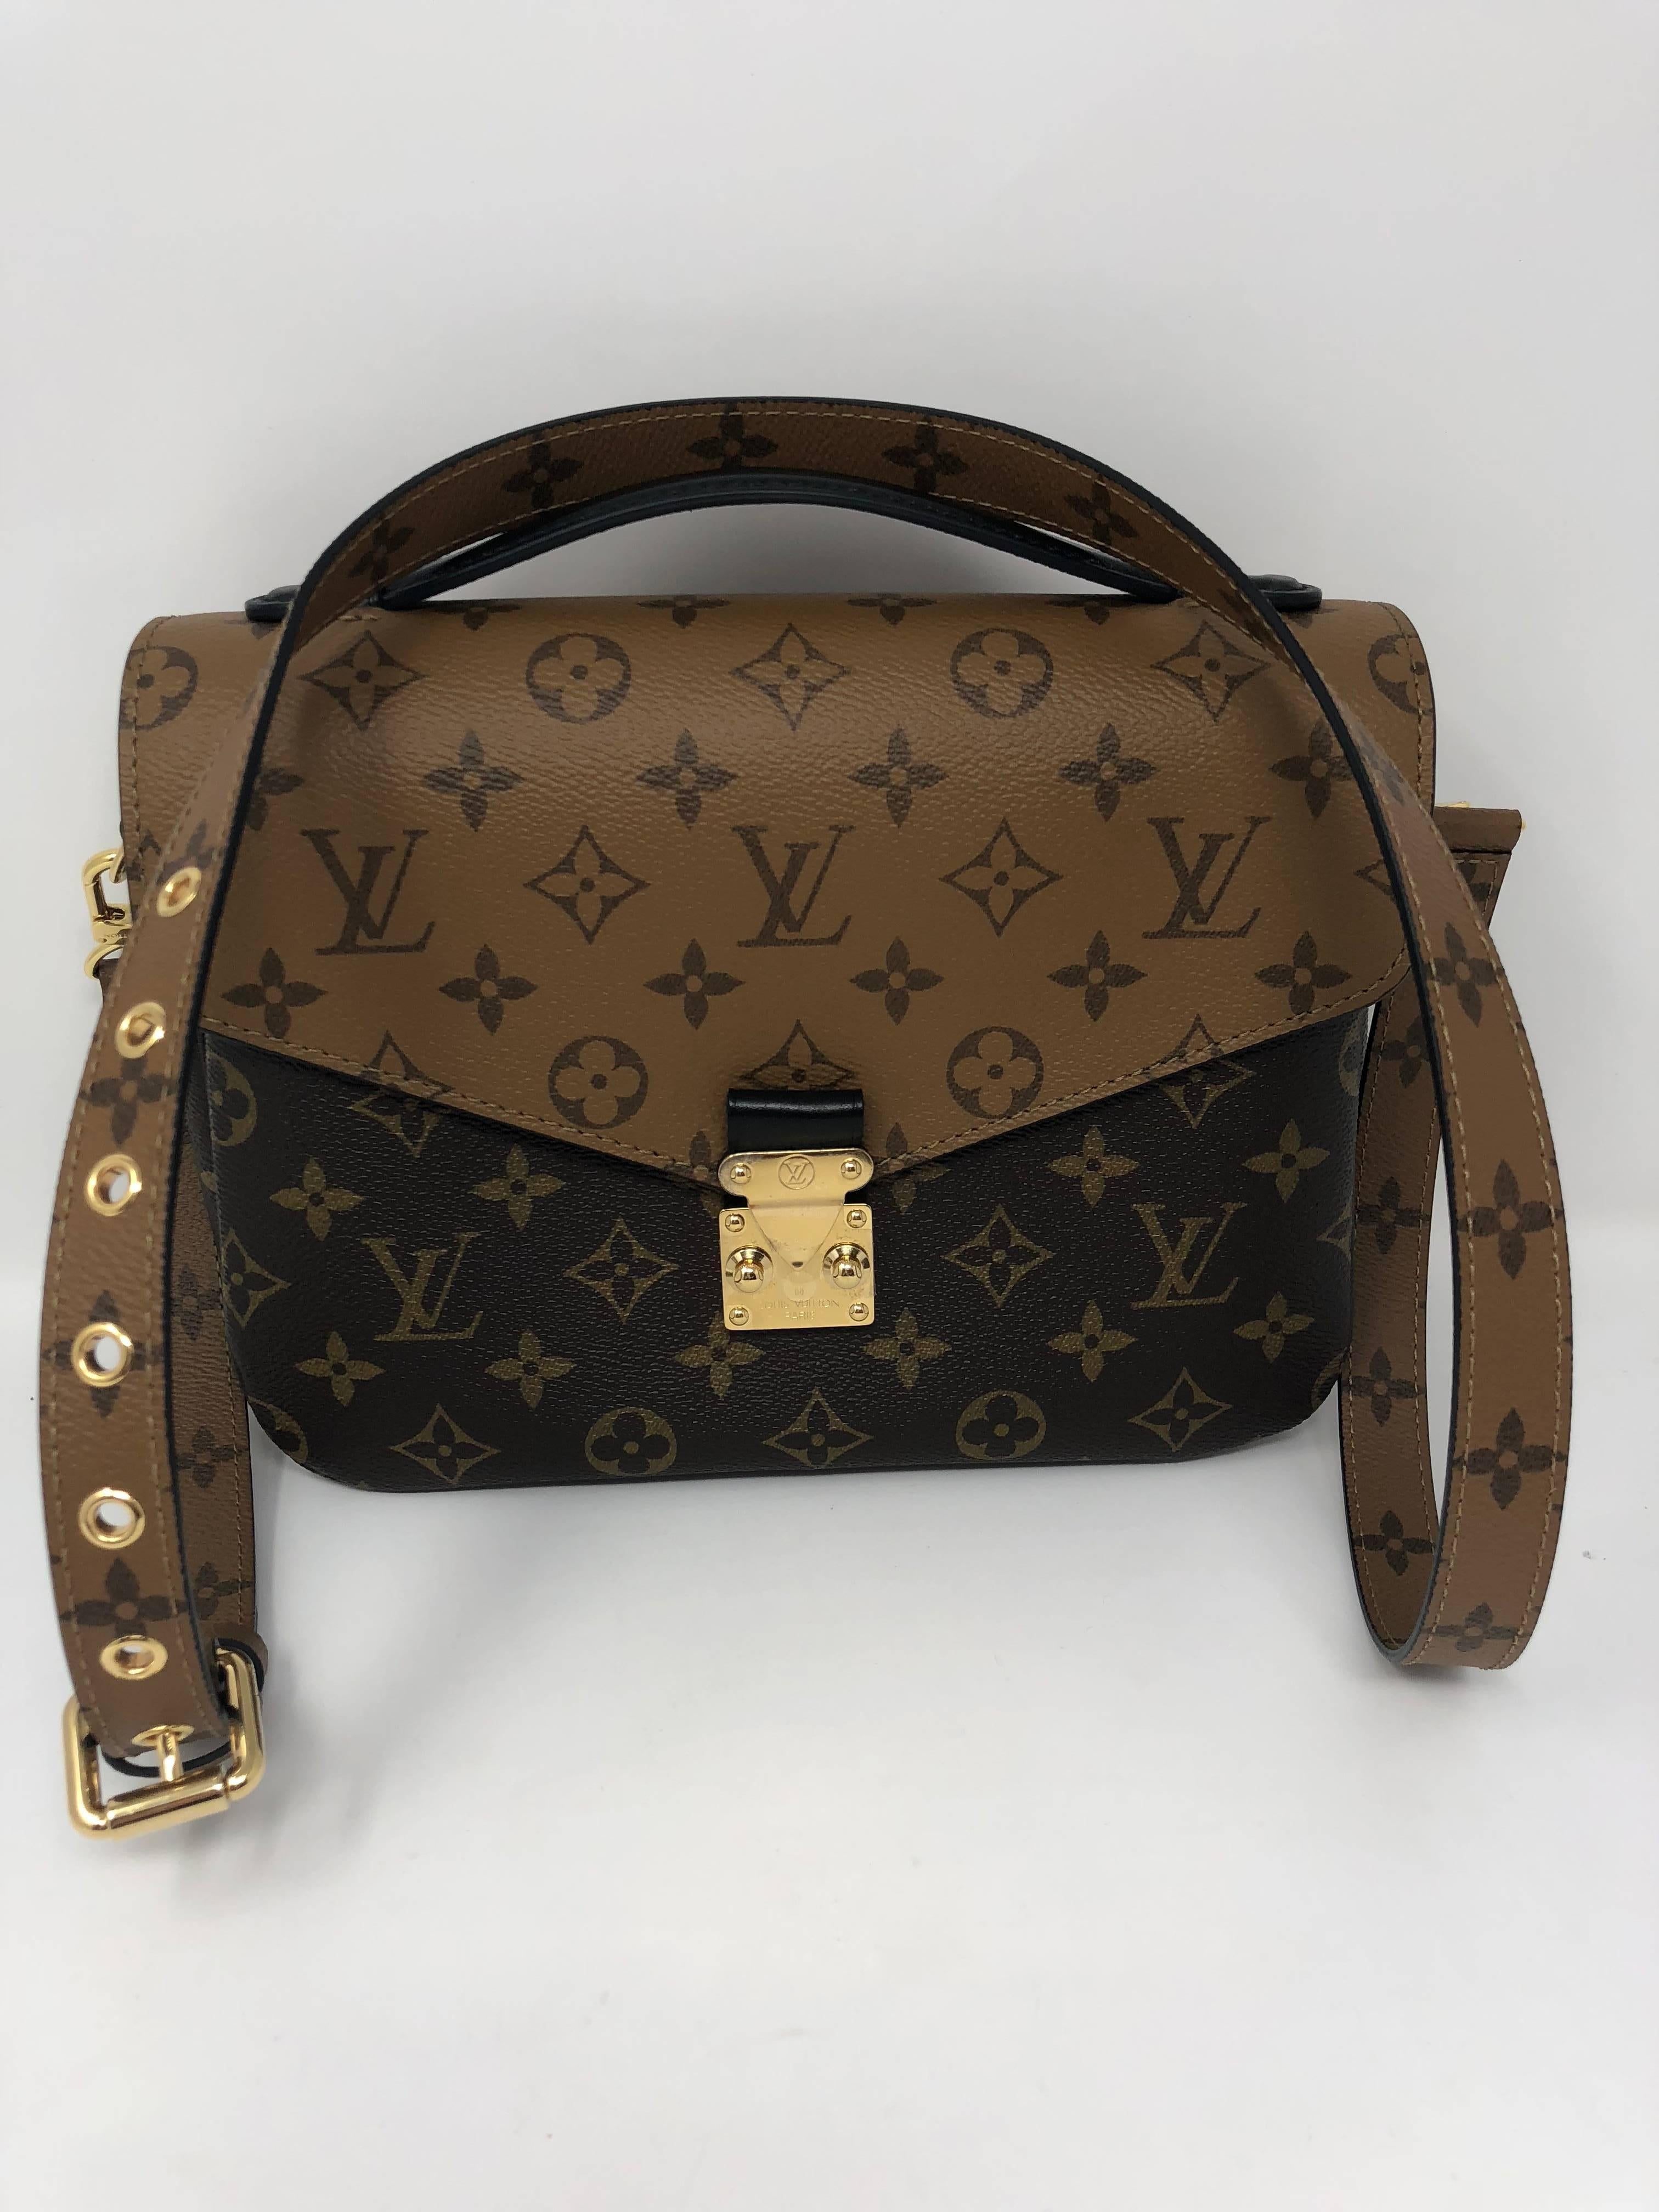 Authentic Louis Vuitton Metis Reverse crossbody bag. Limited edition and sold out. Brand New with plastic still on the hardware. 